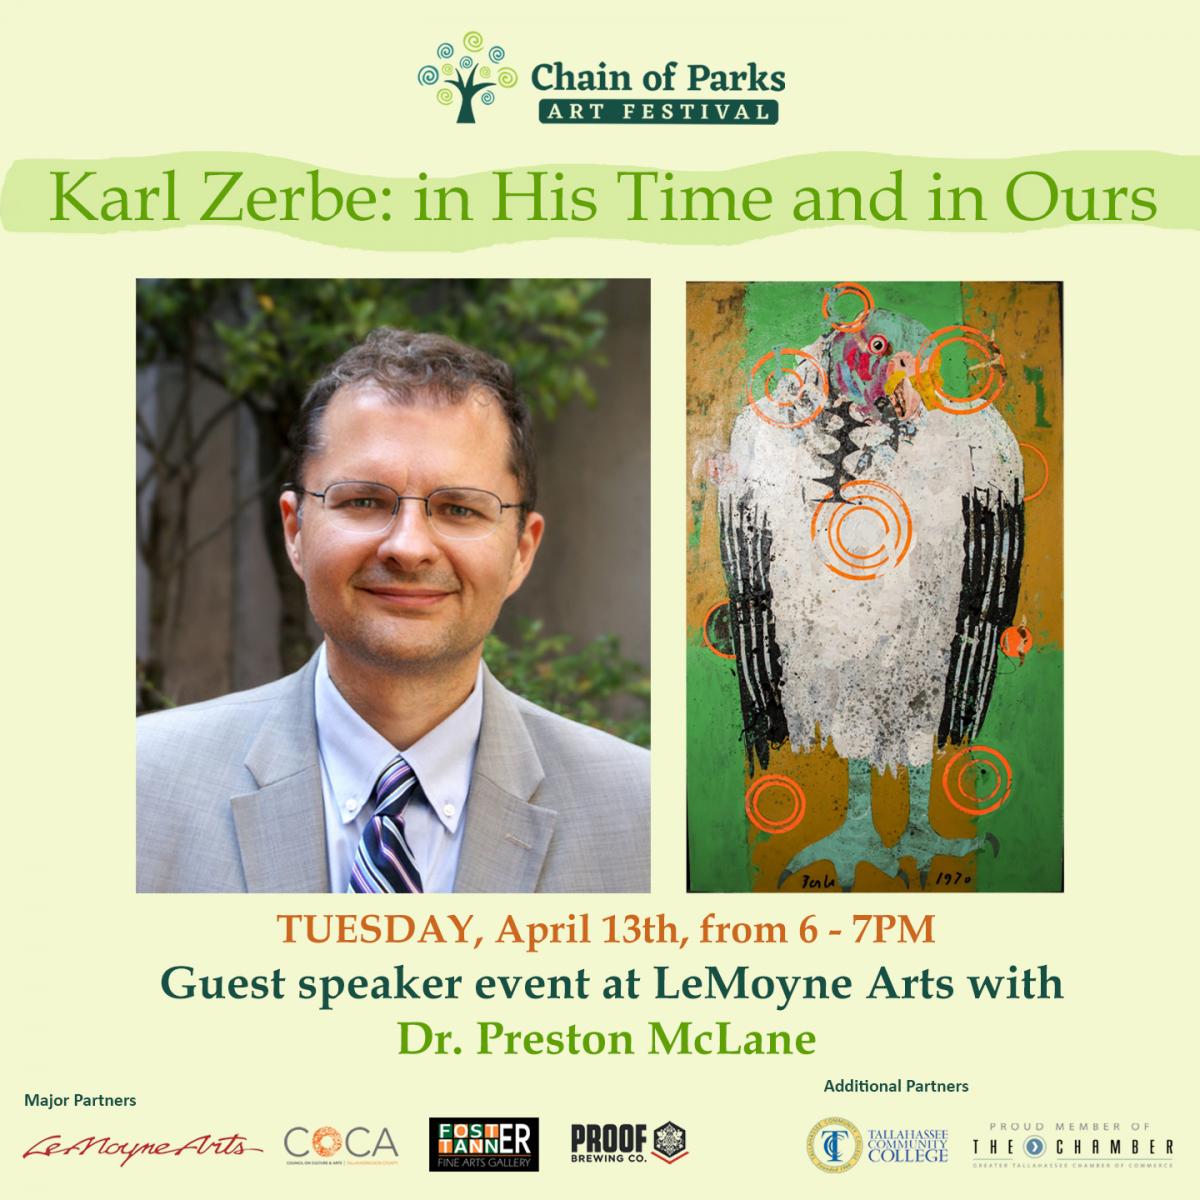 Karl Zerbe: in His Time and in Ours